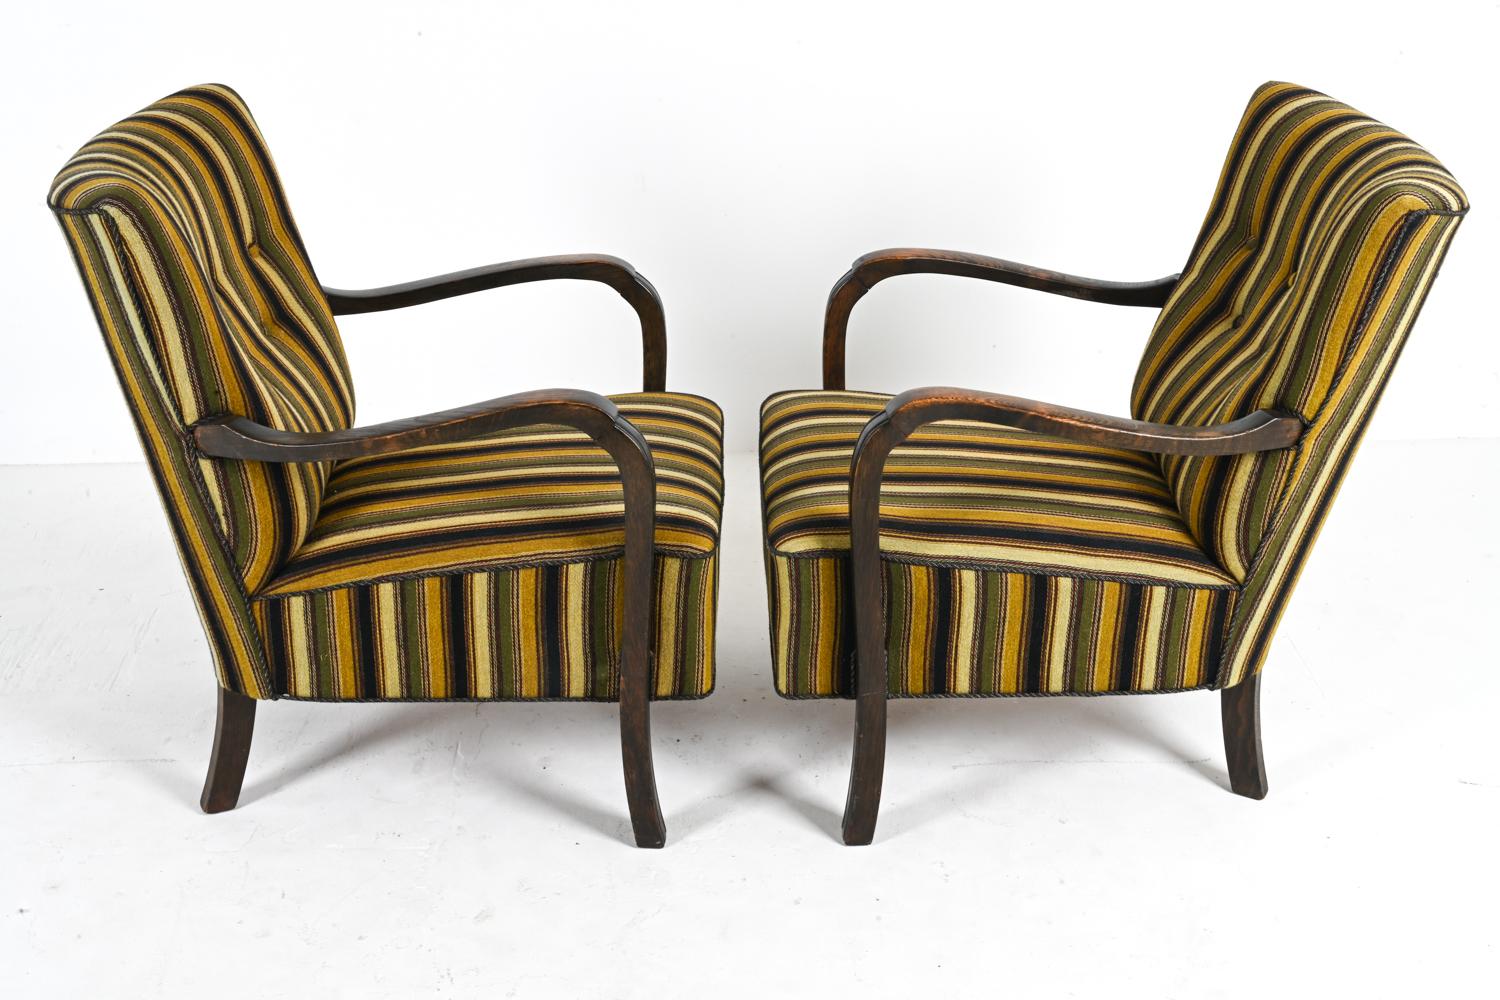 Pair of Fritz Hansen-Style Beechwood Easy Chairs, c. 1940's For Sale 8